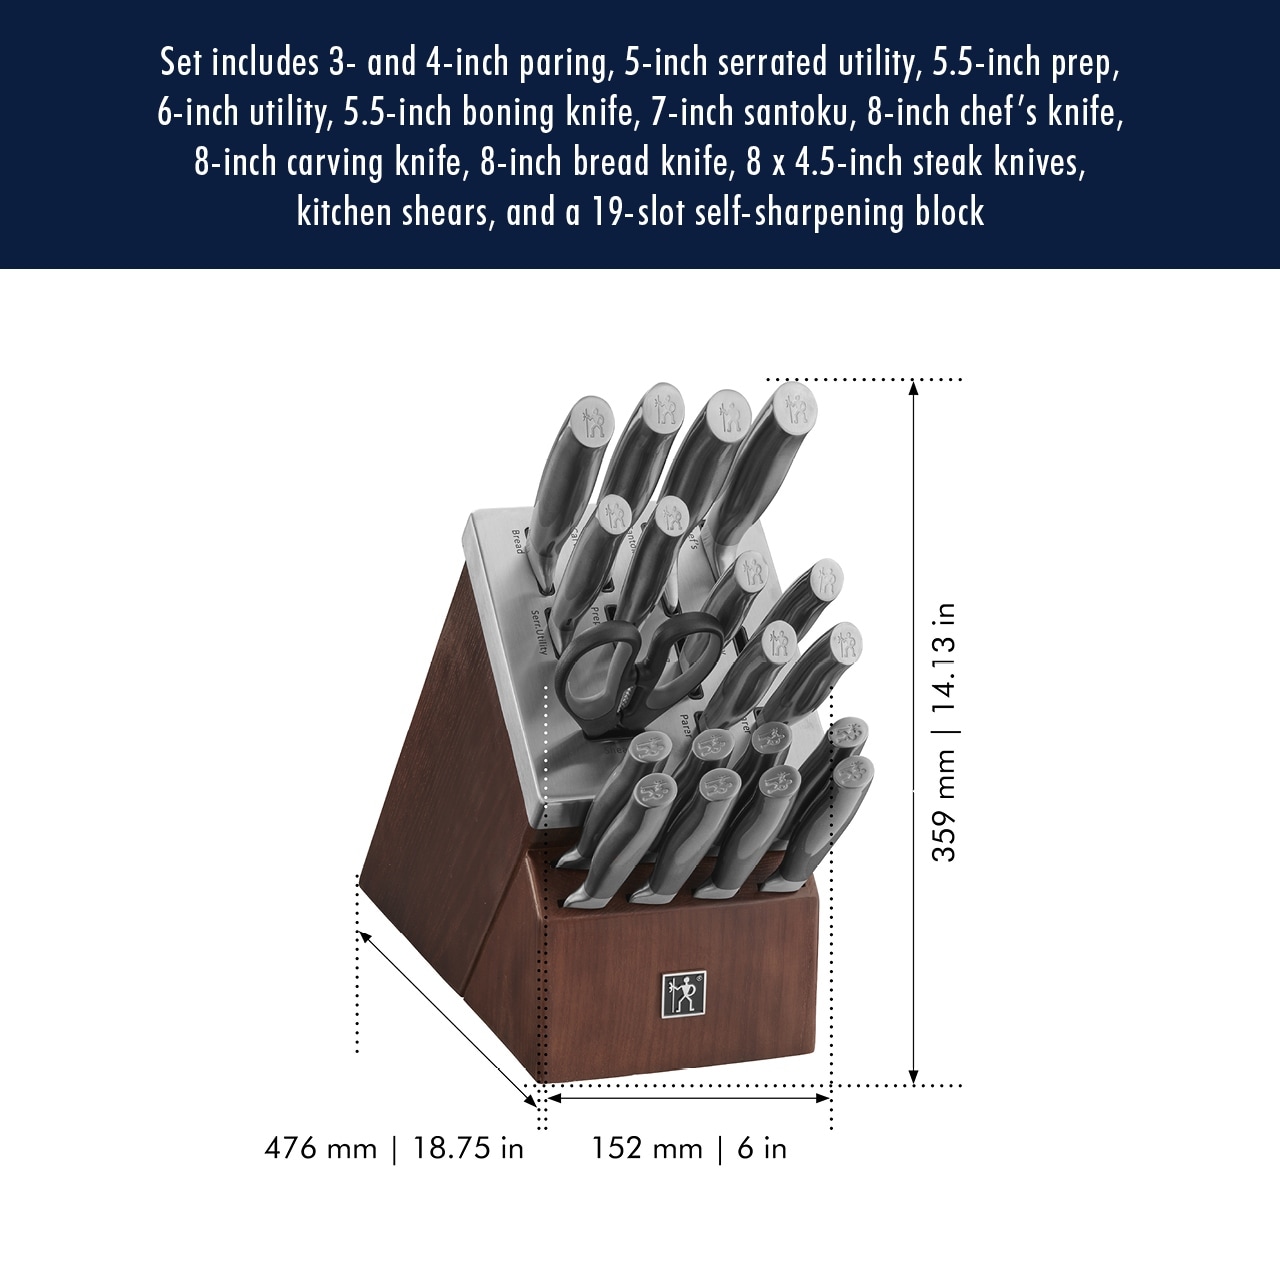 https://ak1.ostkcdn.com/images/products/is/images/direct/74a675948e15396253f0291820d2346b8f6ebe5d/HENCKELS-Graphite-Self-Sharpening-Block-Set.jpg